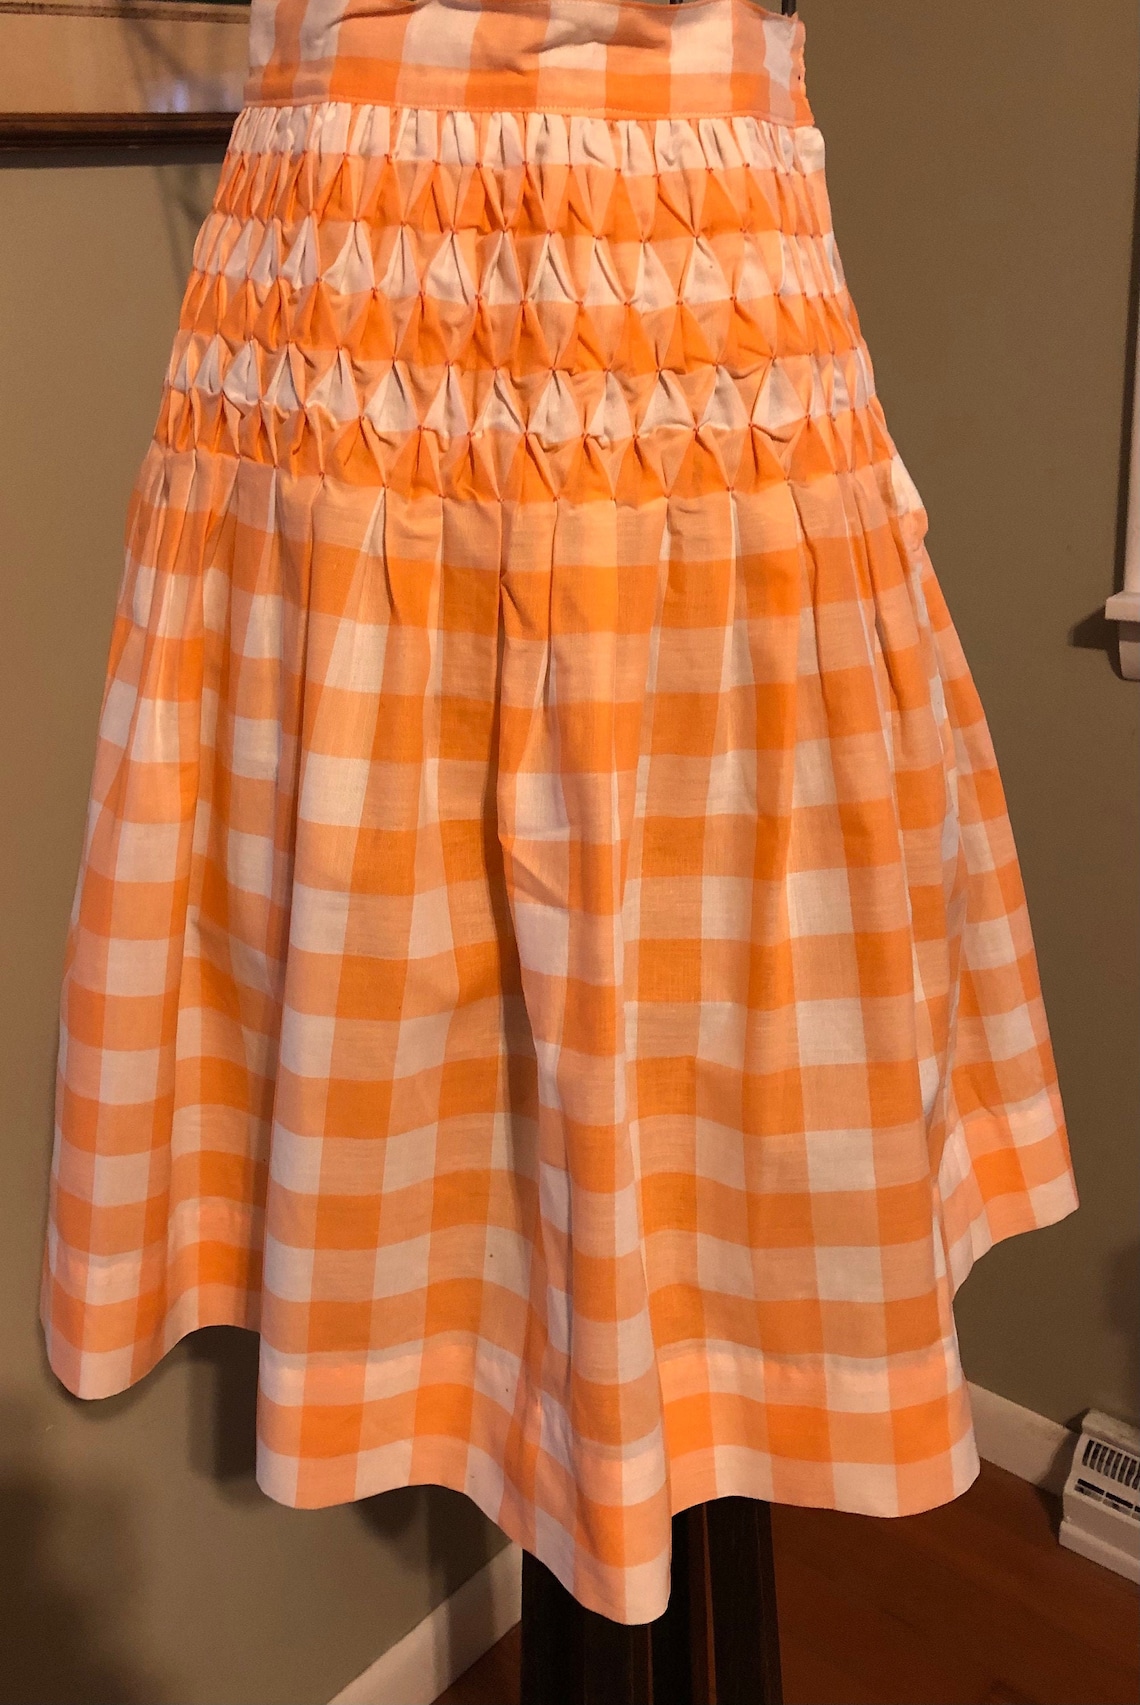 1950s orange and white gingham check skirt with smocked hips | Etsy